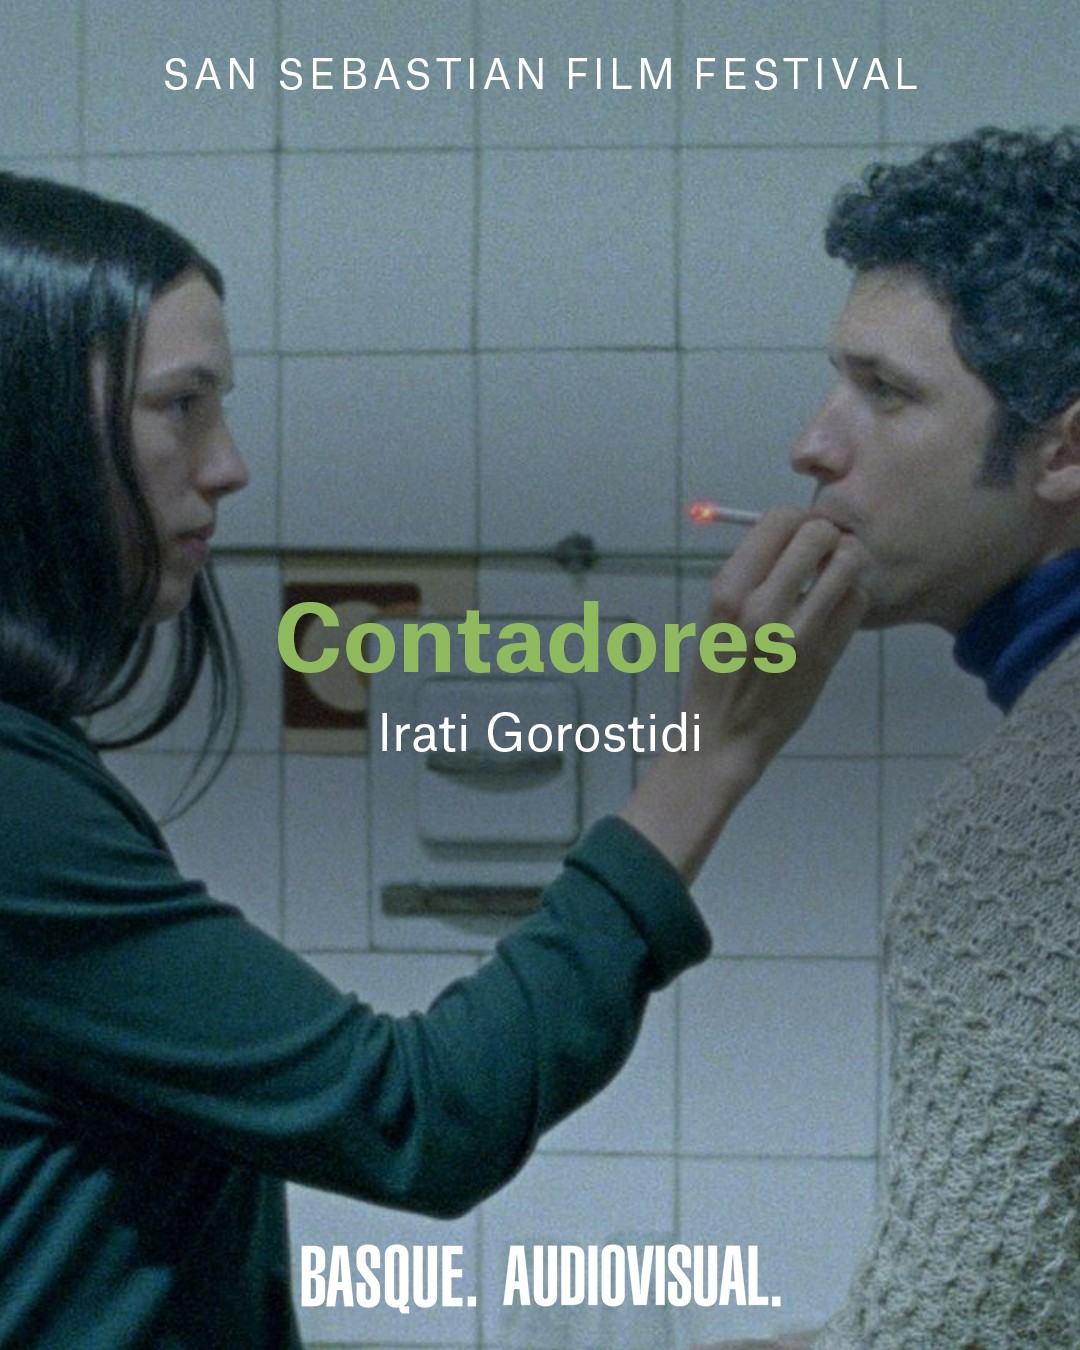 “Being able to participate in the Cannes Critics' Week was a huge accolade that put ‘Contadores’ in the spotlight and will help promote future projects”